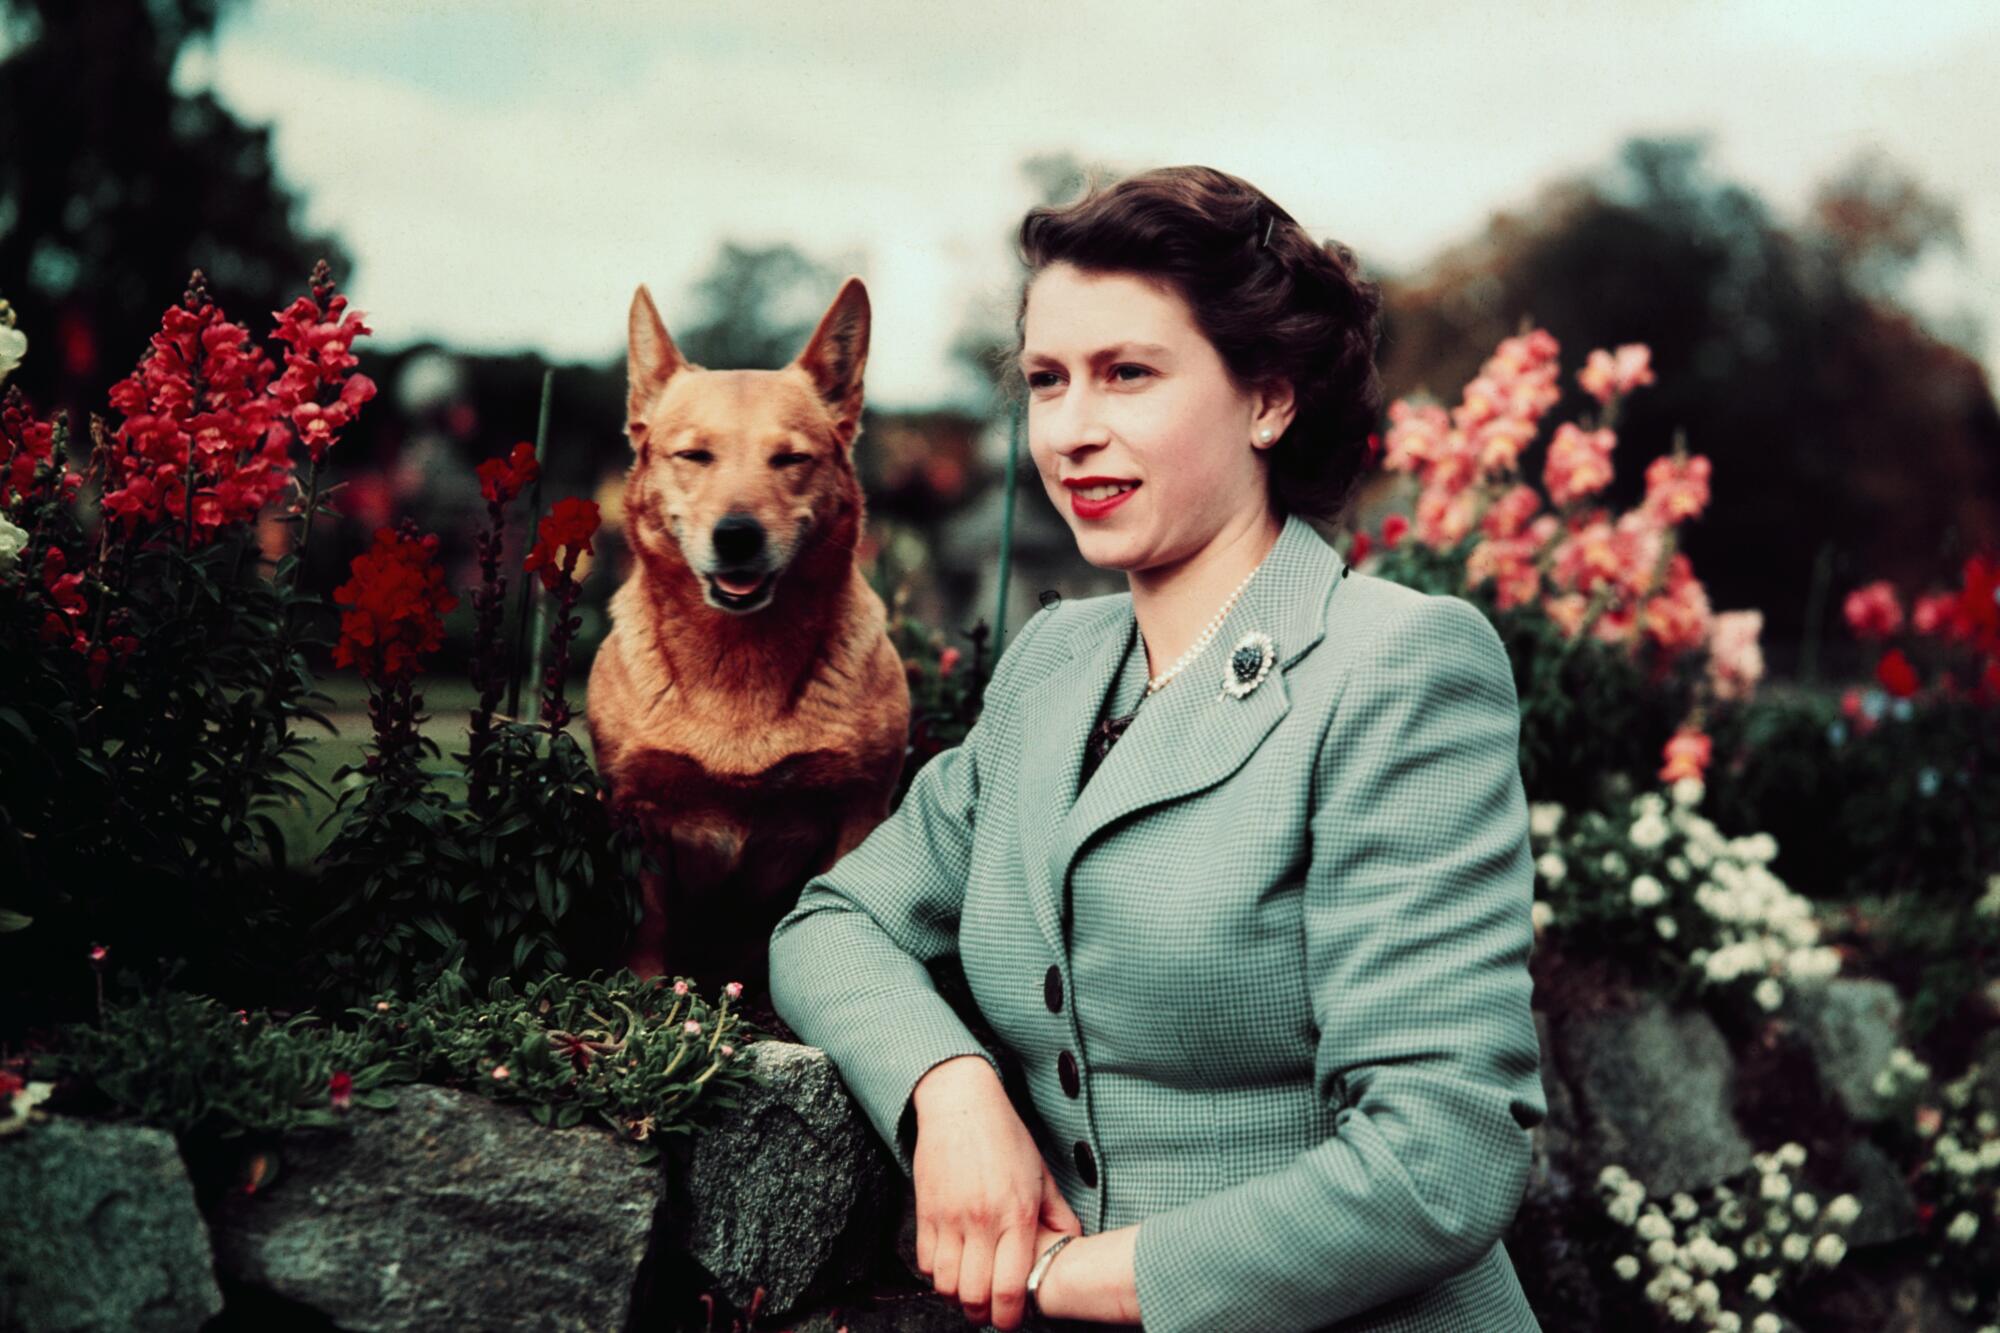 Queen Elizabeth II rests her arm on a stone wall among flowers near one of her Corgis in 1952